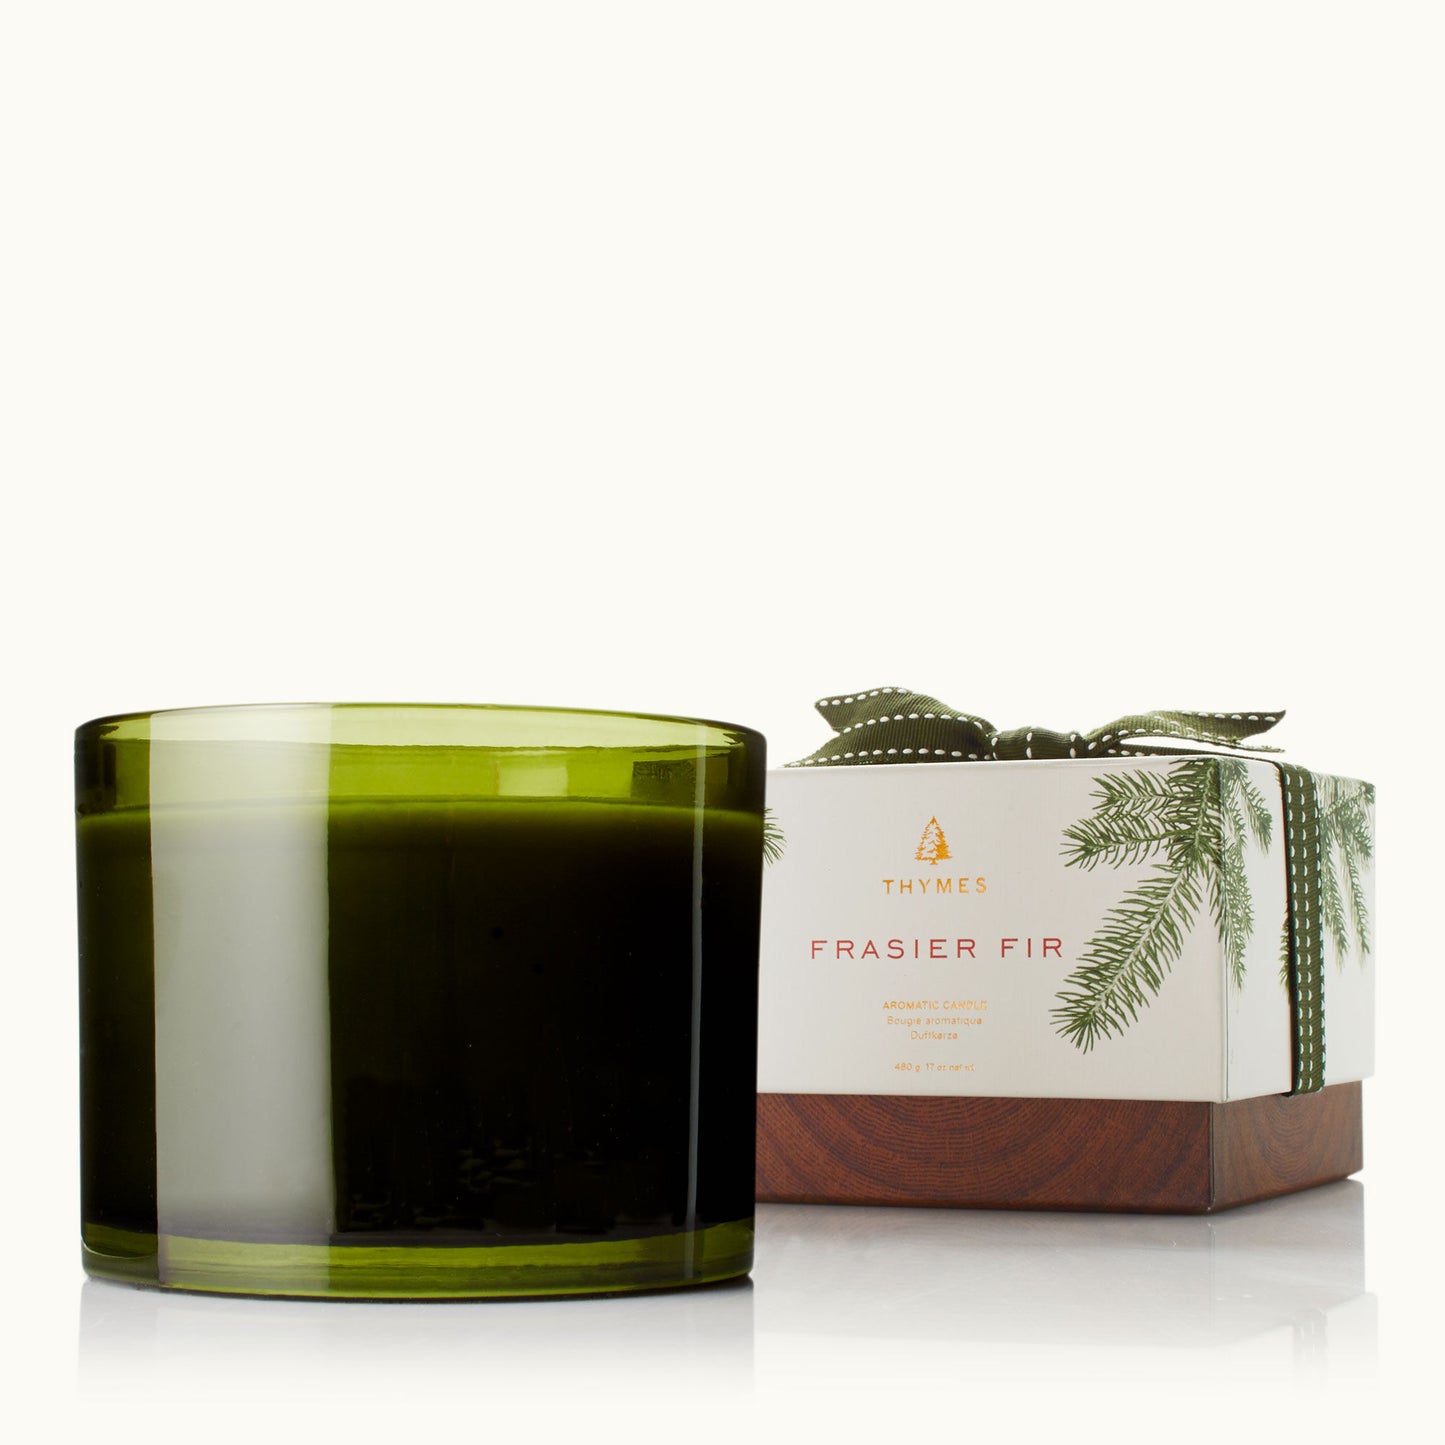 Thymes 3-Wick Candle 17 oz | Frasier Fir